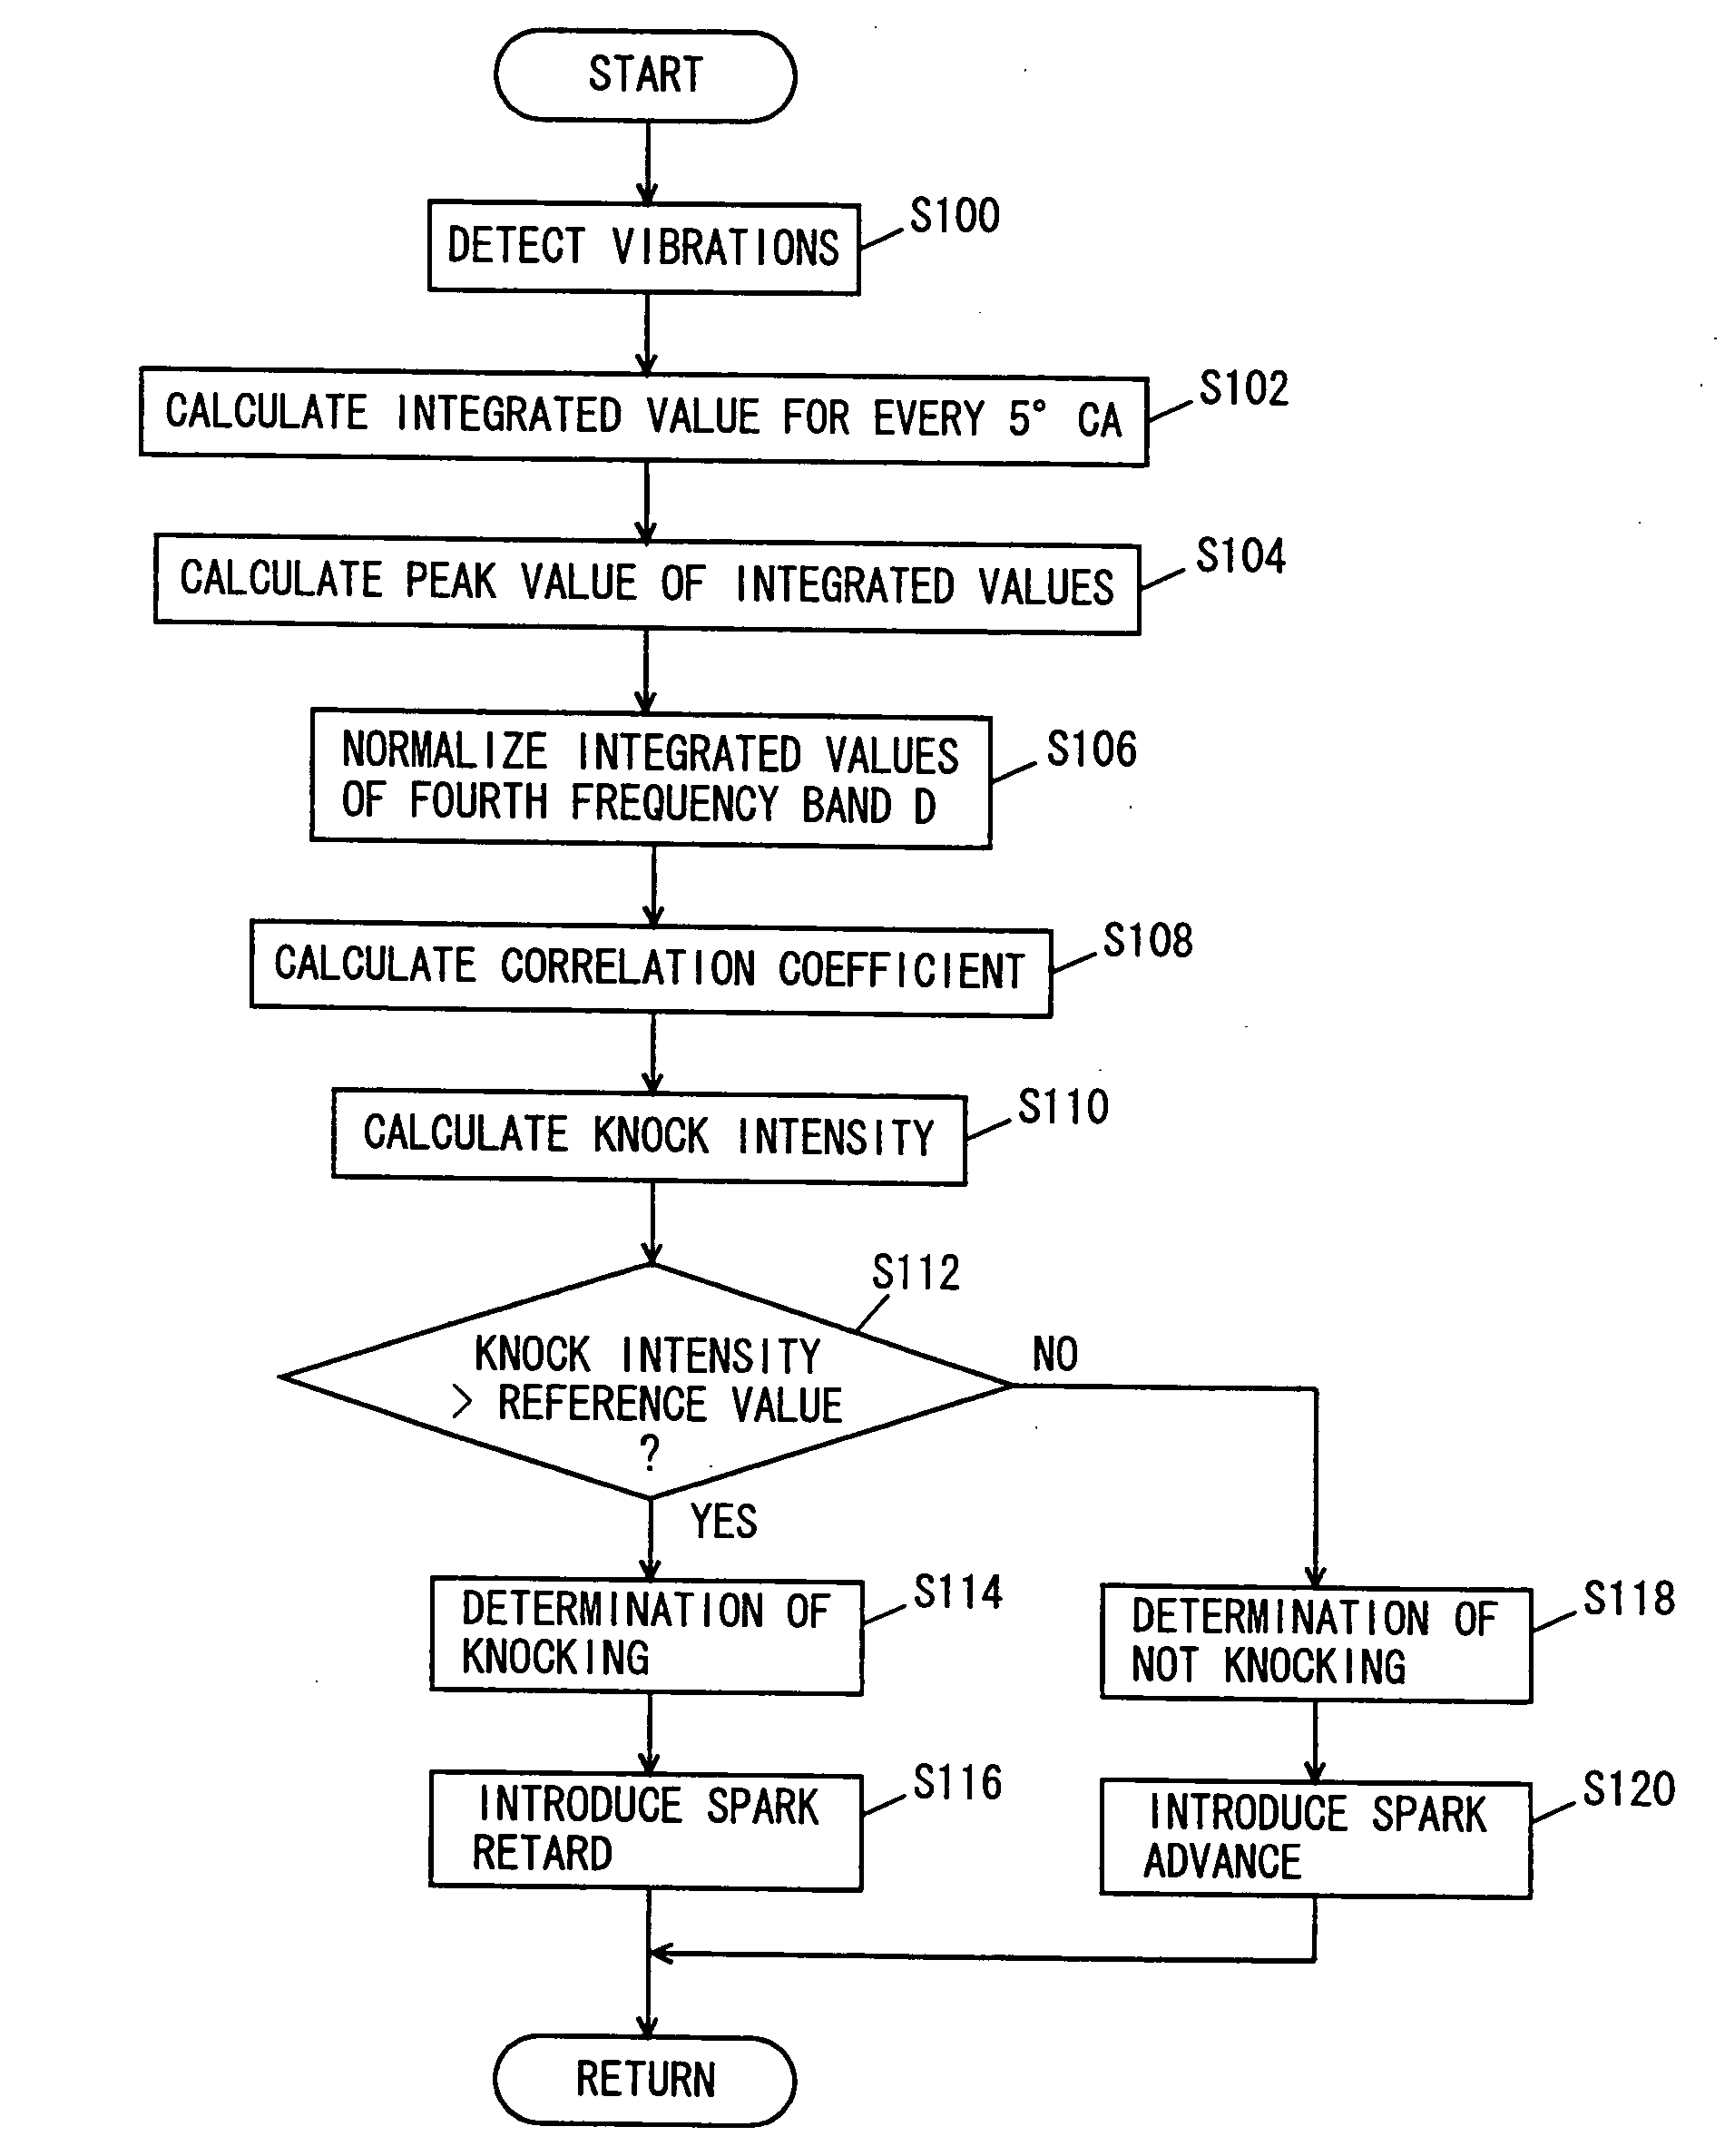 Knocking determination device for internal combustion engine